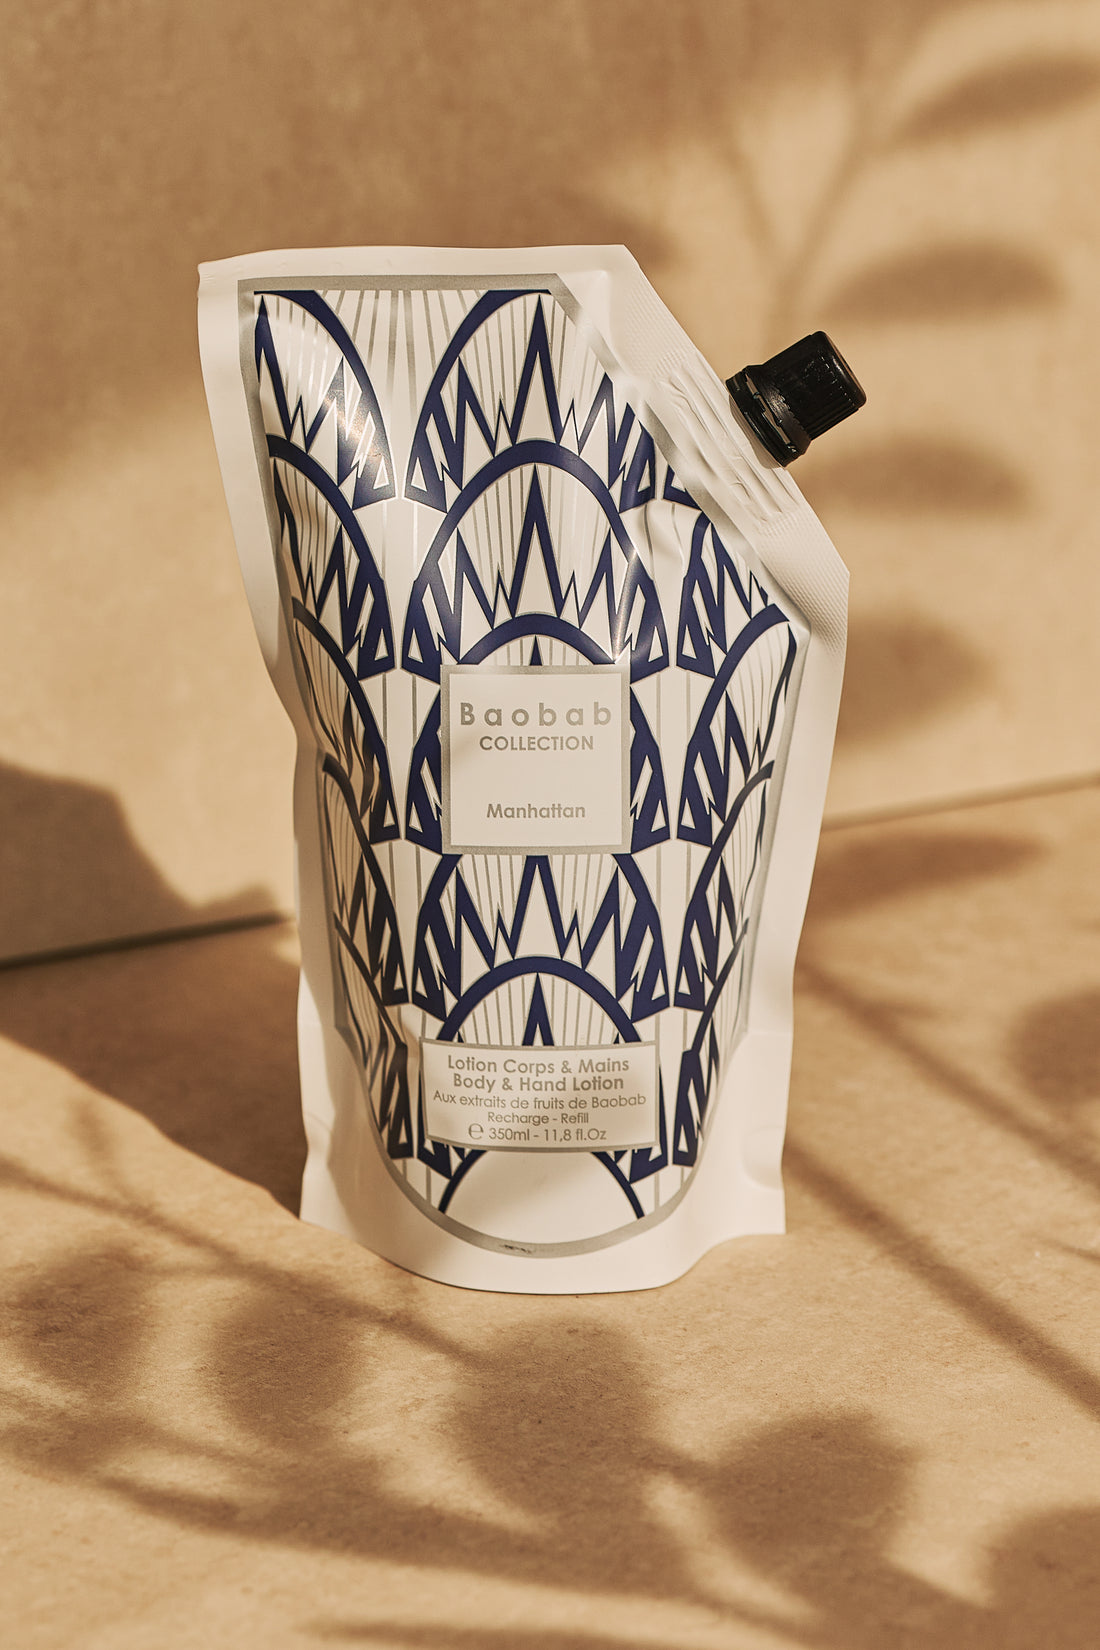 REFILL BODY & HAND LOTION MANHATTAN - Baobab Collection